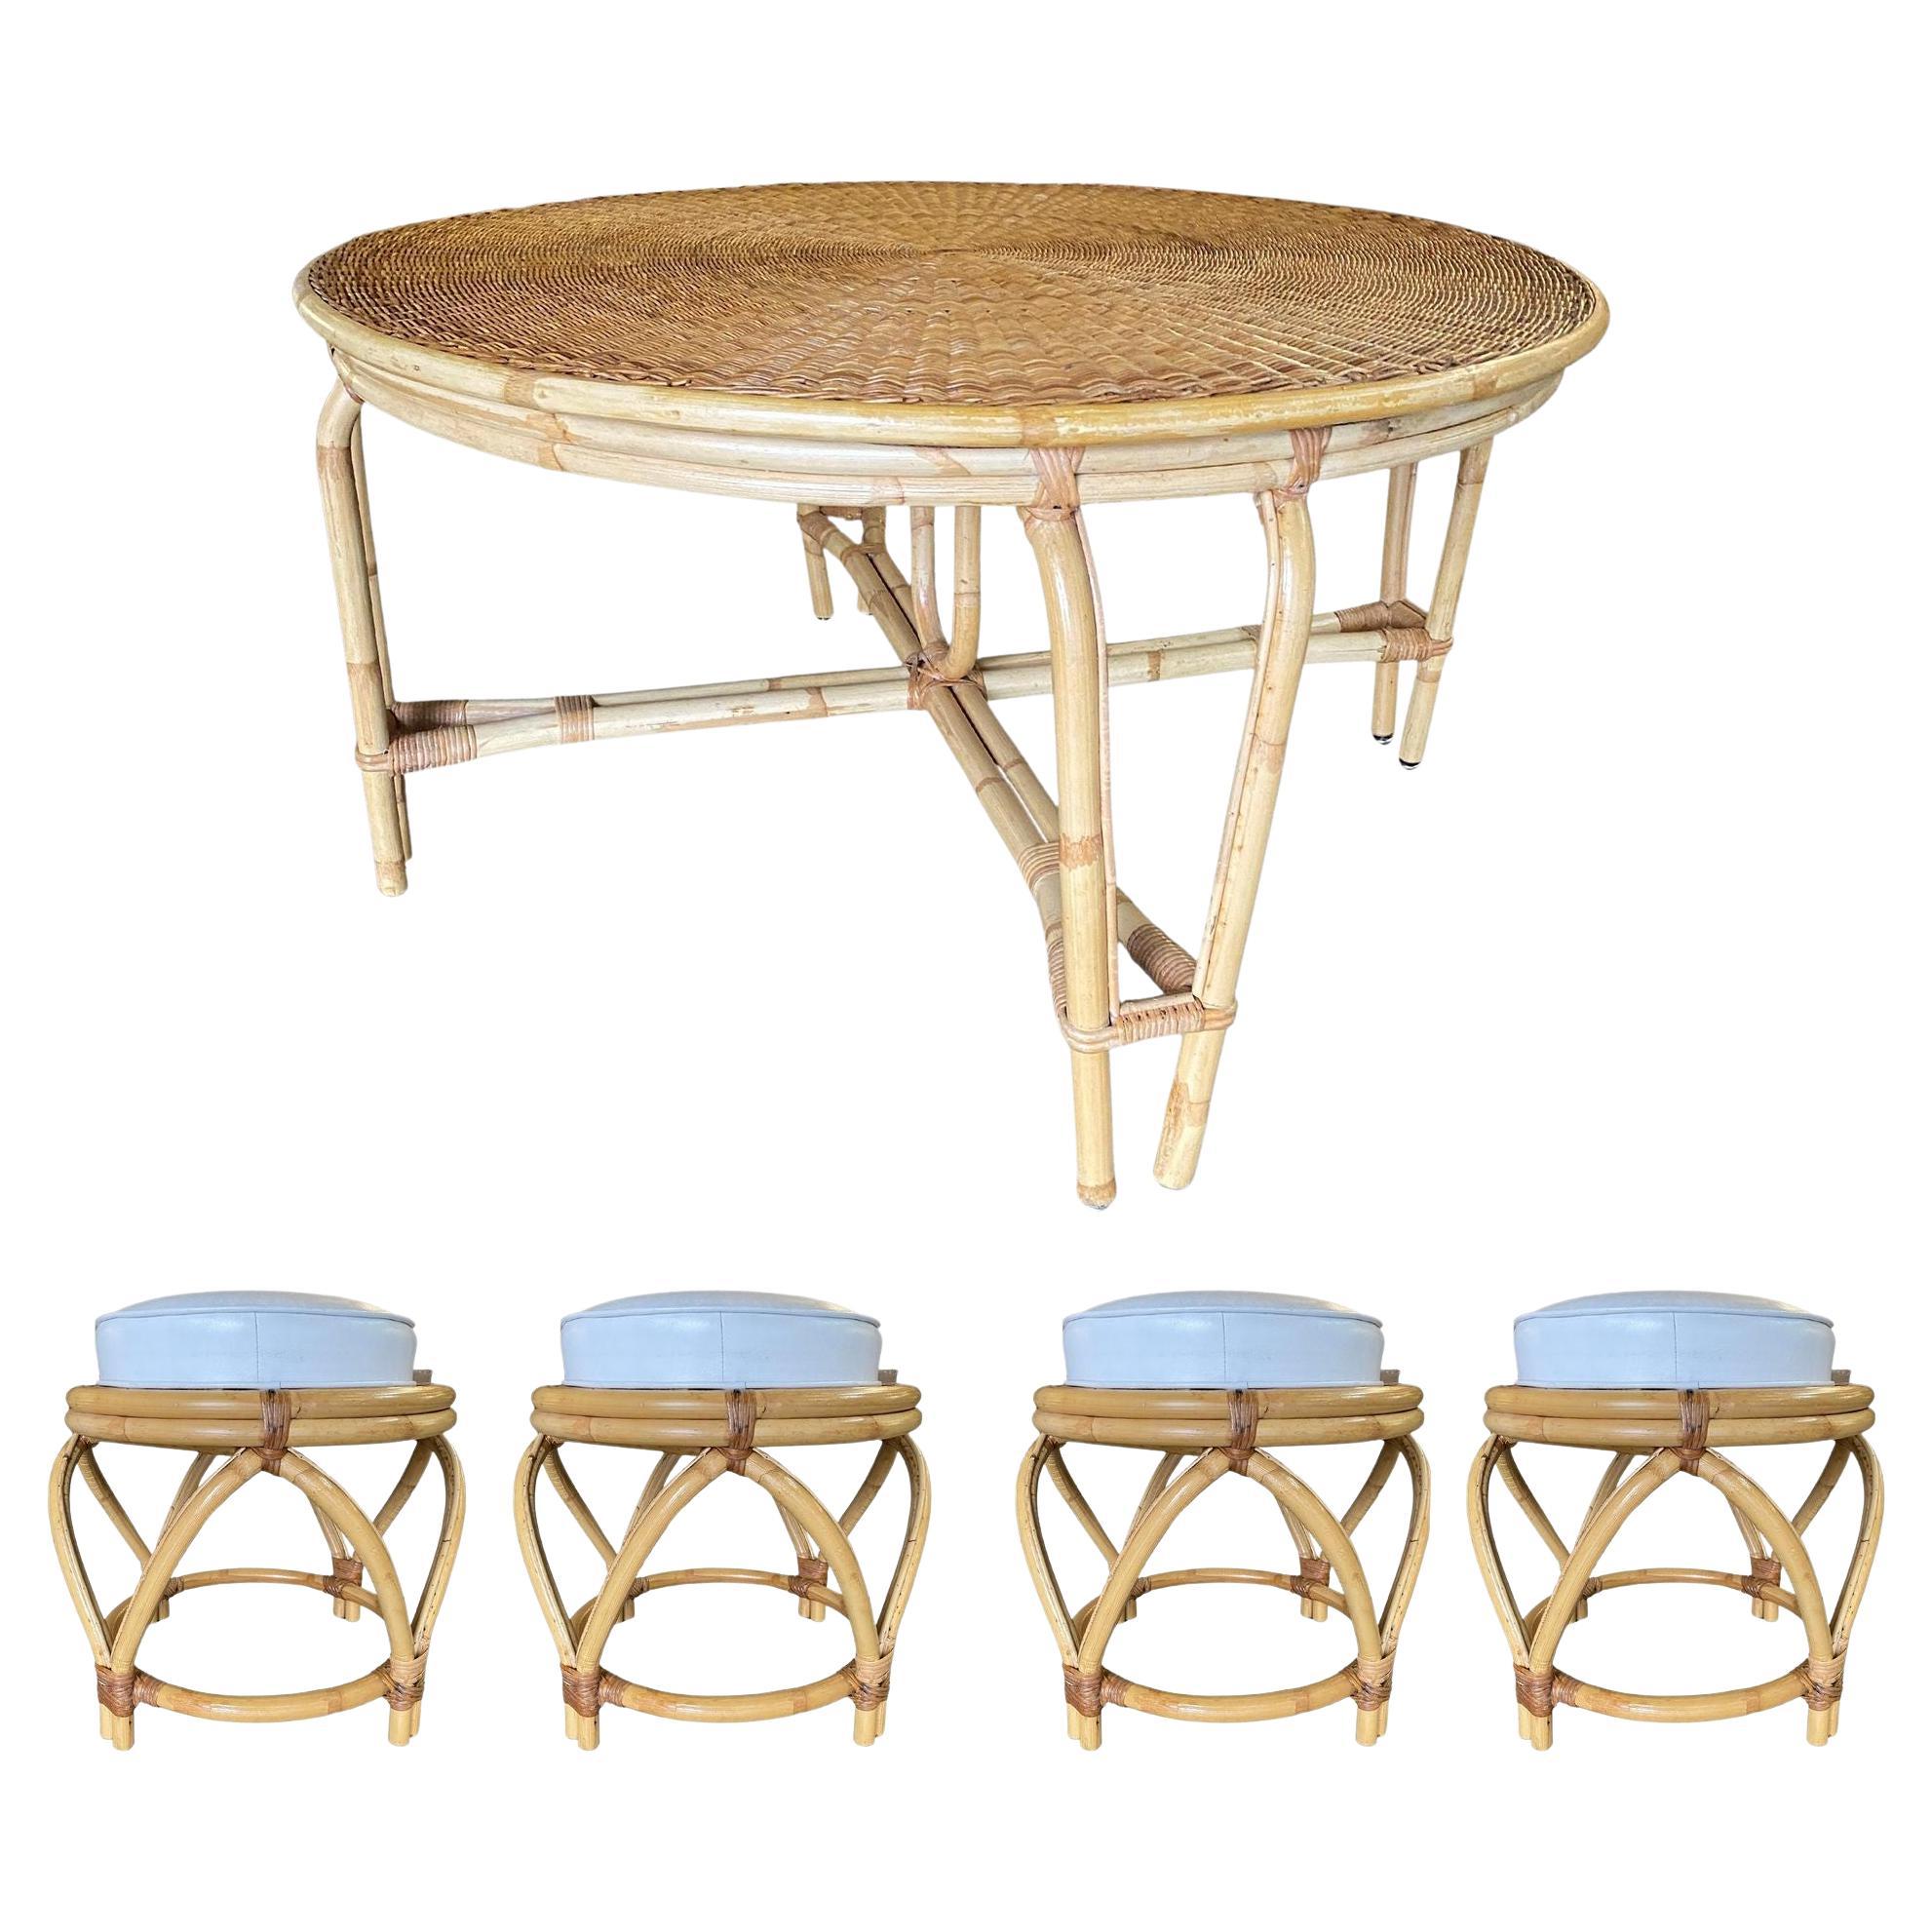 Round Wicker Top Rattan Table with Matching Stools Dining Set For Sale